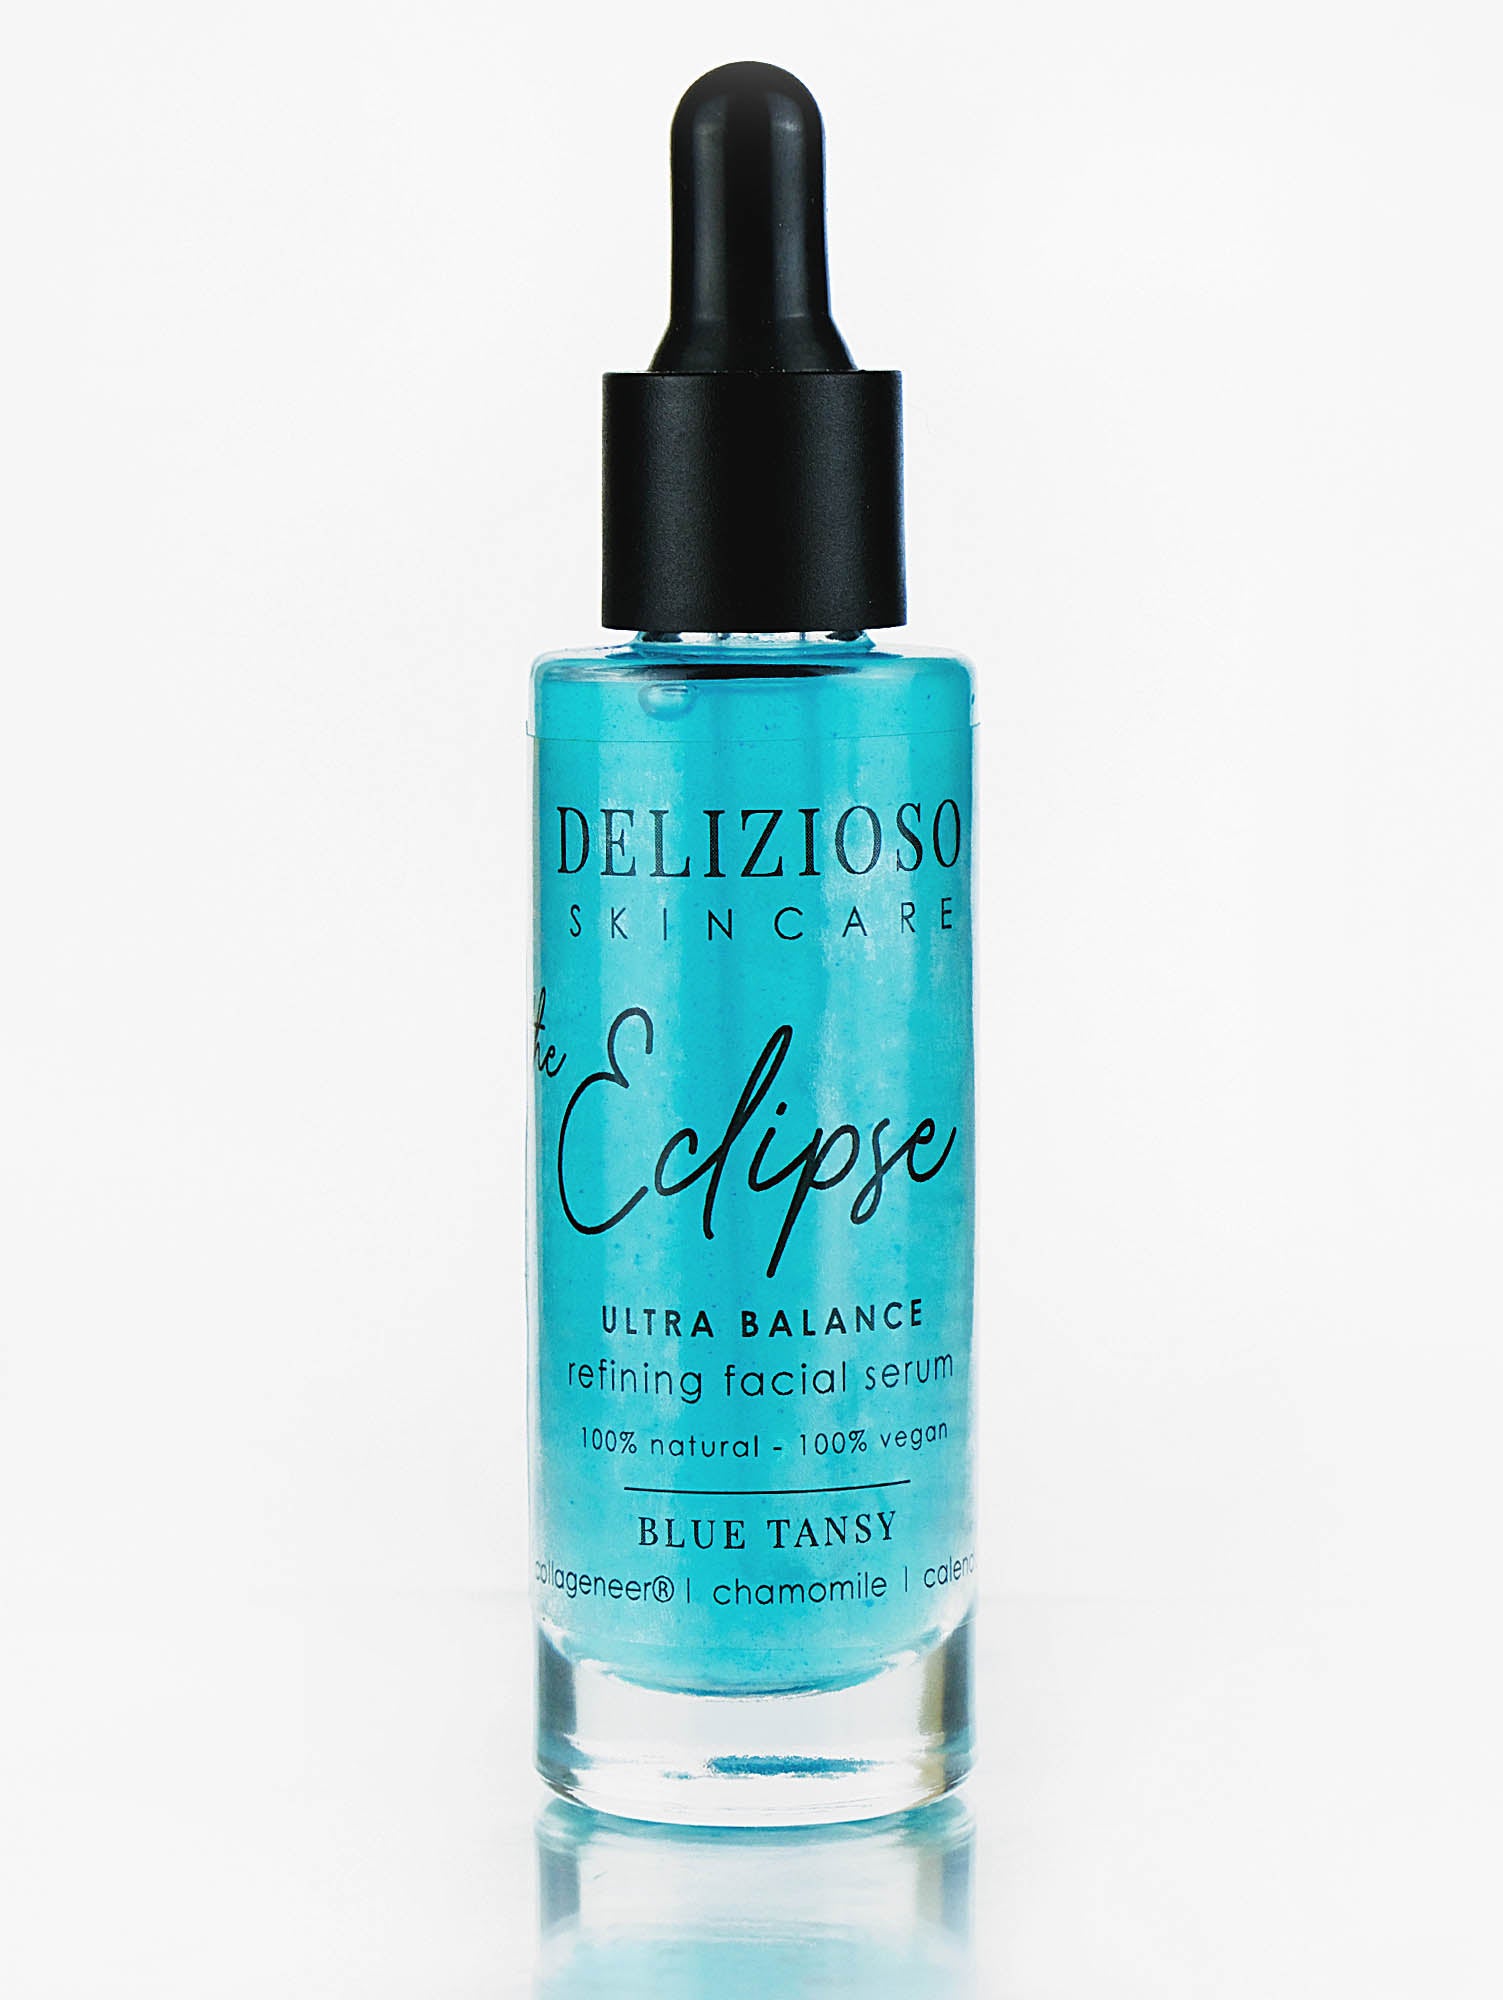 The Eclipse Blue Tansy Facial Serum